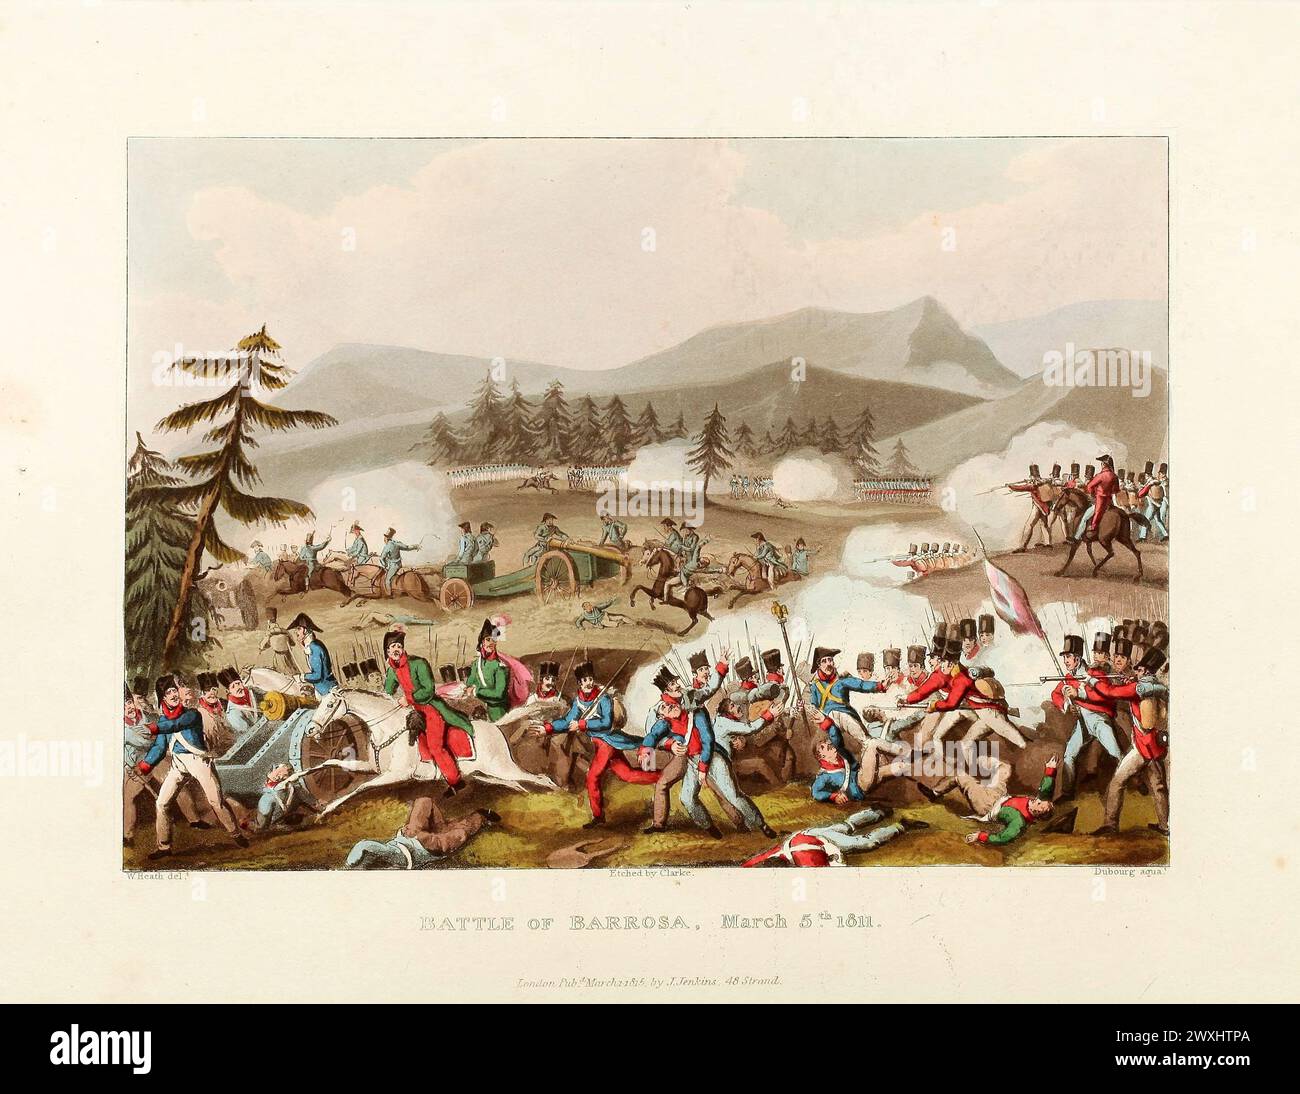 Battle of Barrosa, Mar 5th, 1811. Vintage Coloured Aquatint, published by James Jenkins, 1815,  from  The martial achievements of Great Britain and her allies : from 1799 to 1815. Stock Photo